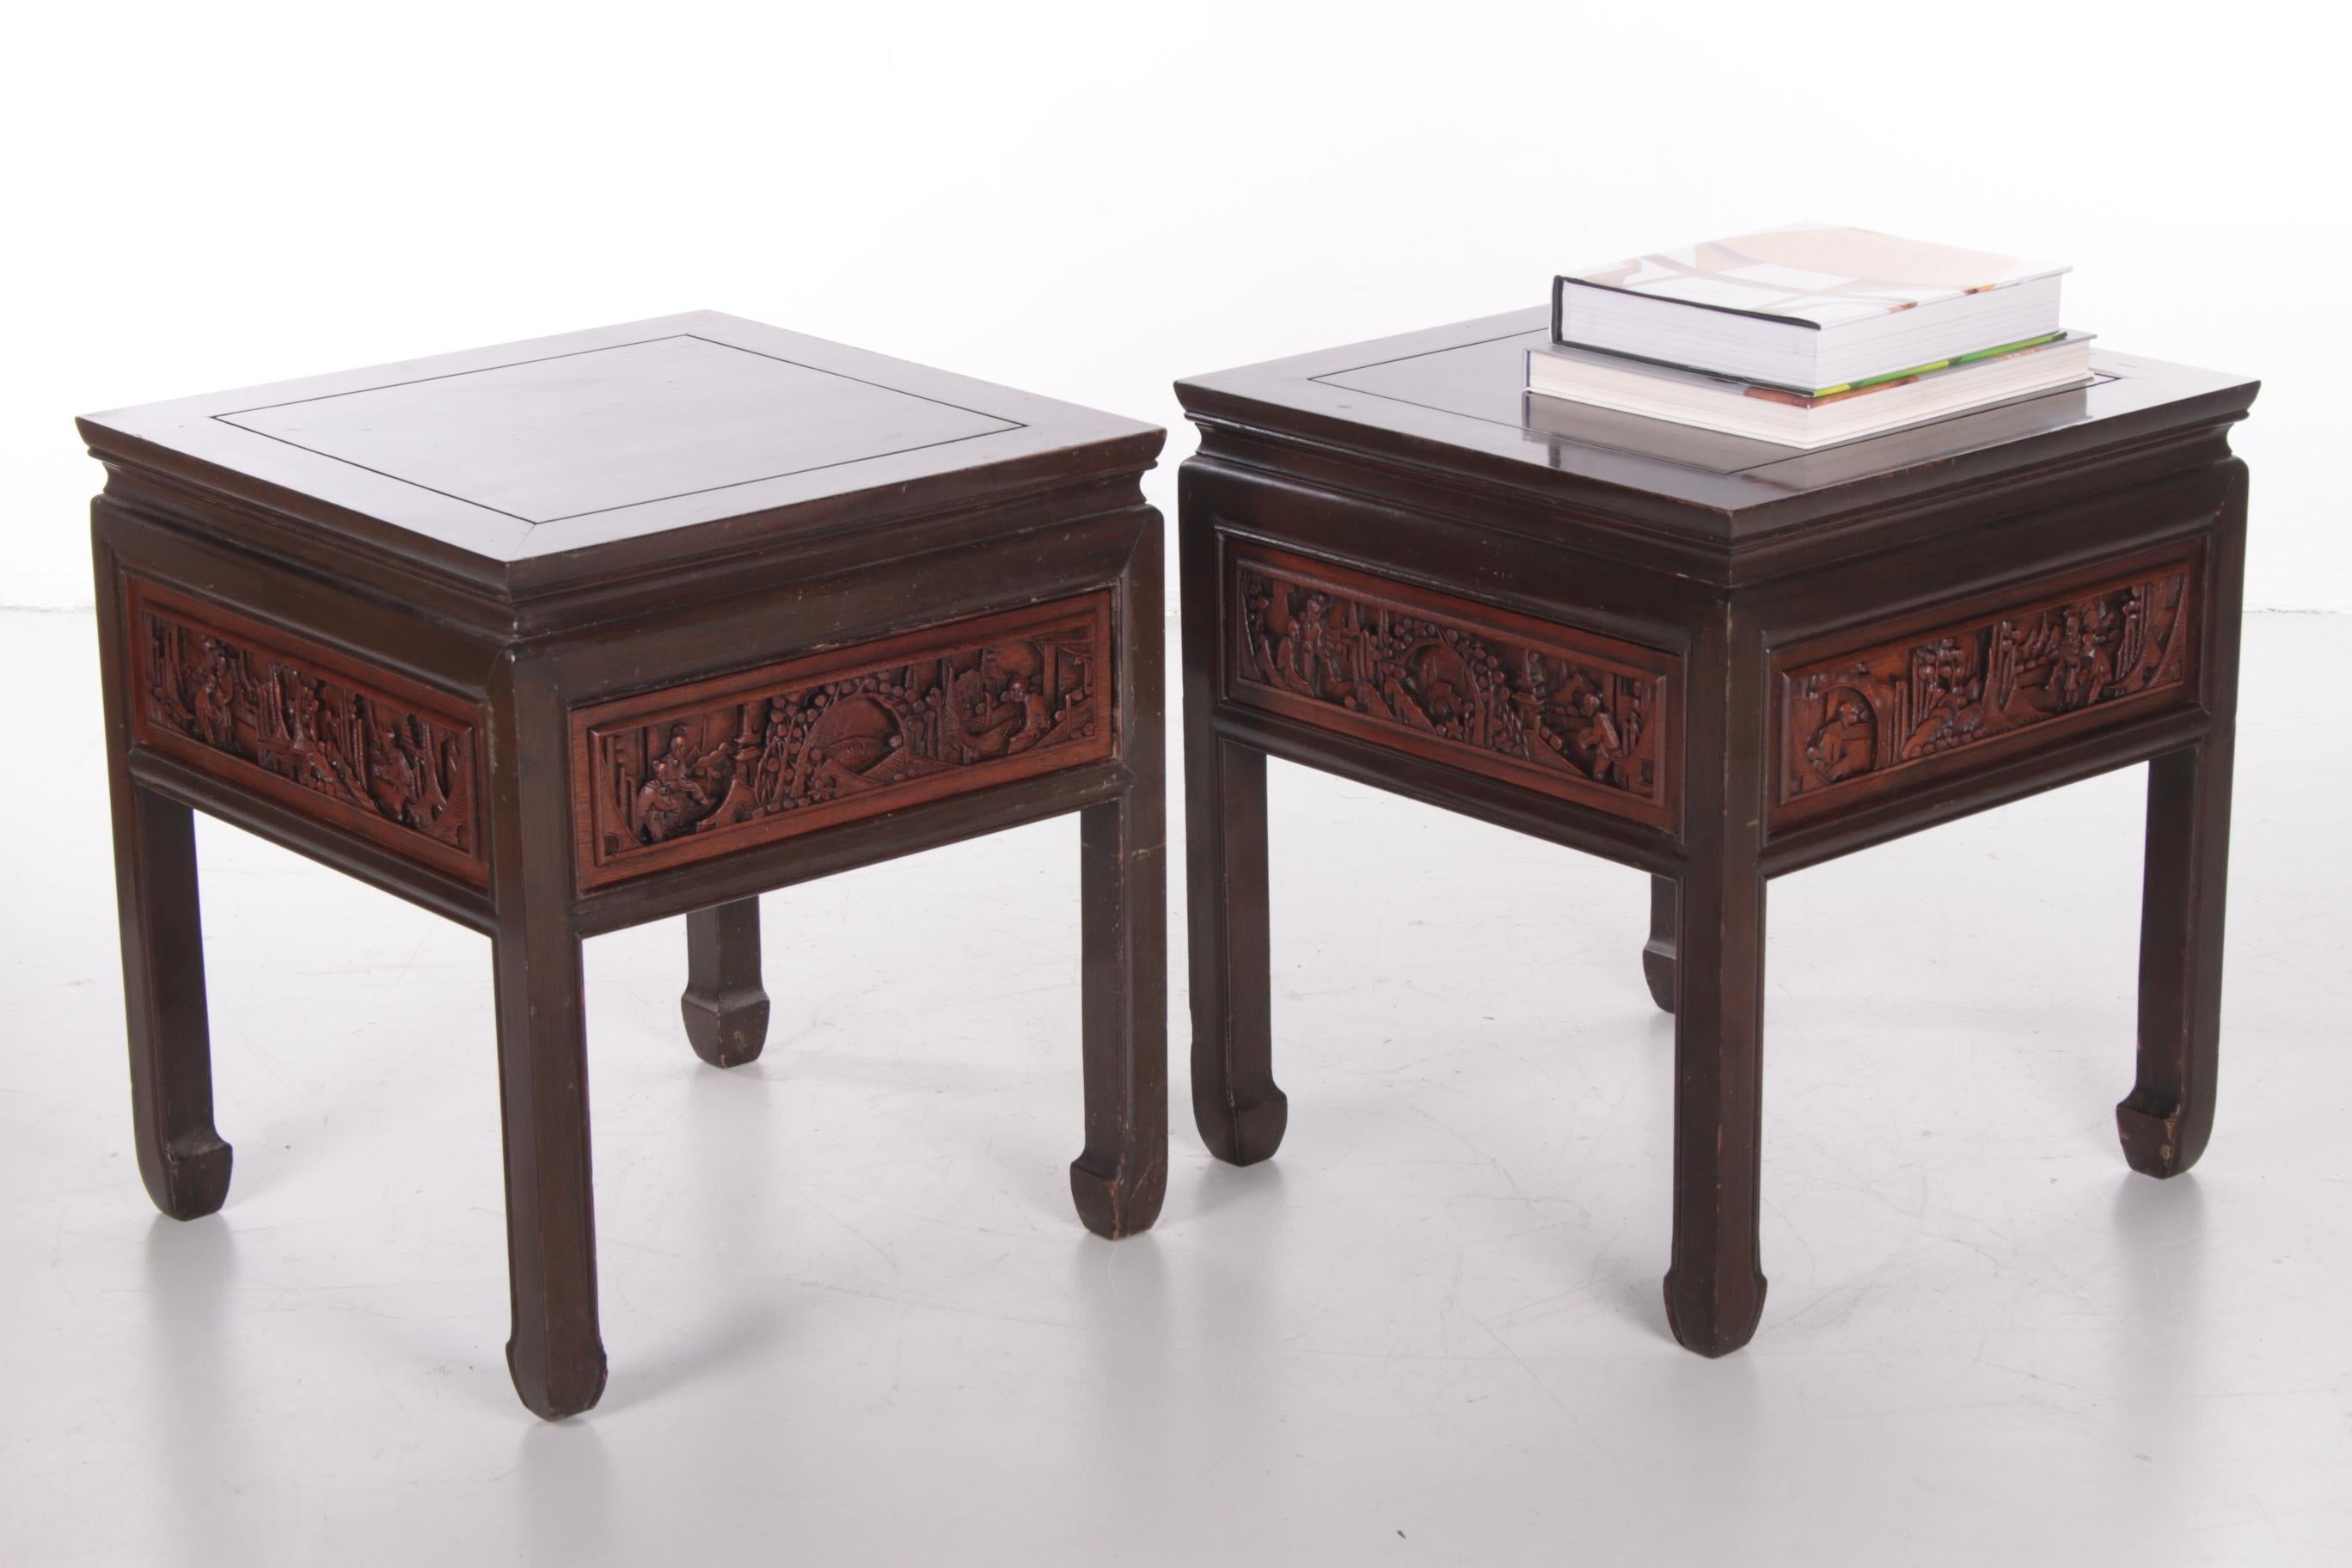 20th Century Chinese Wooden Bedside Tables with Beautiful Hand Carving 12